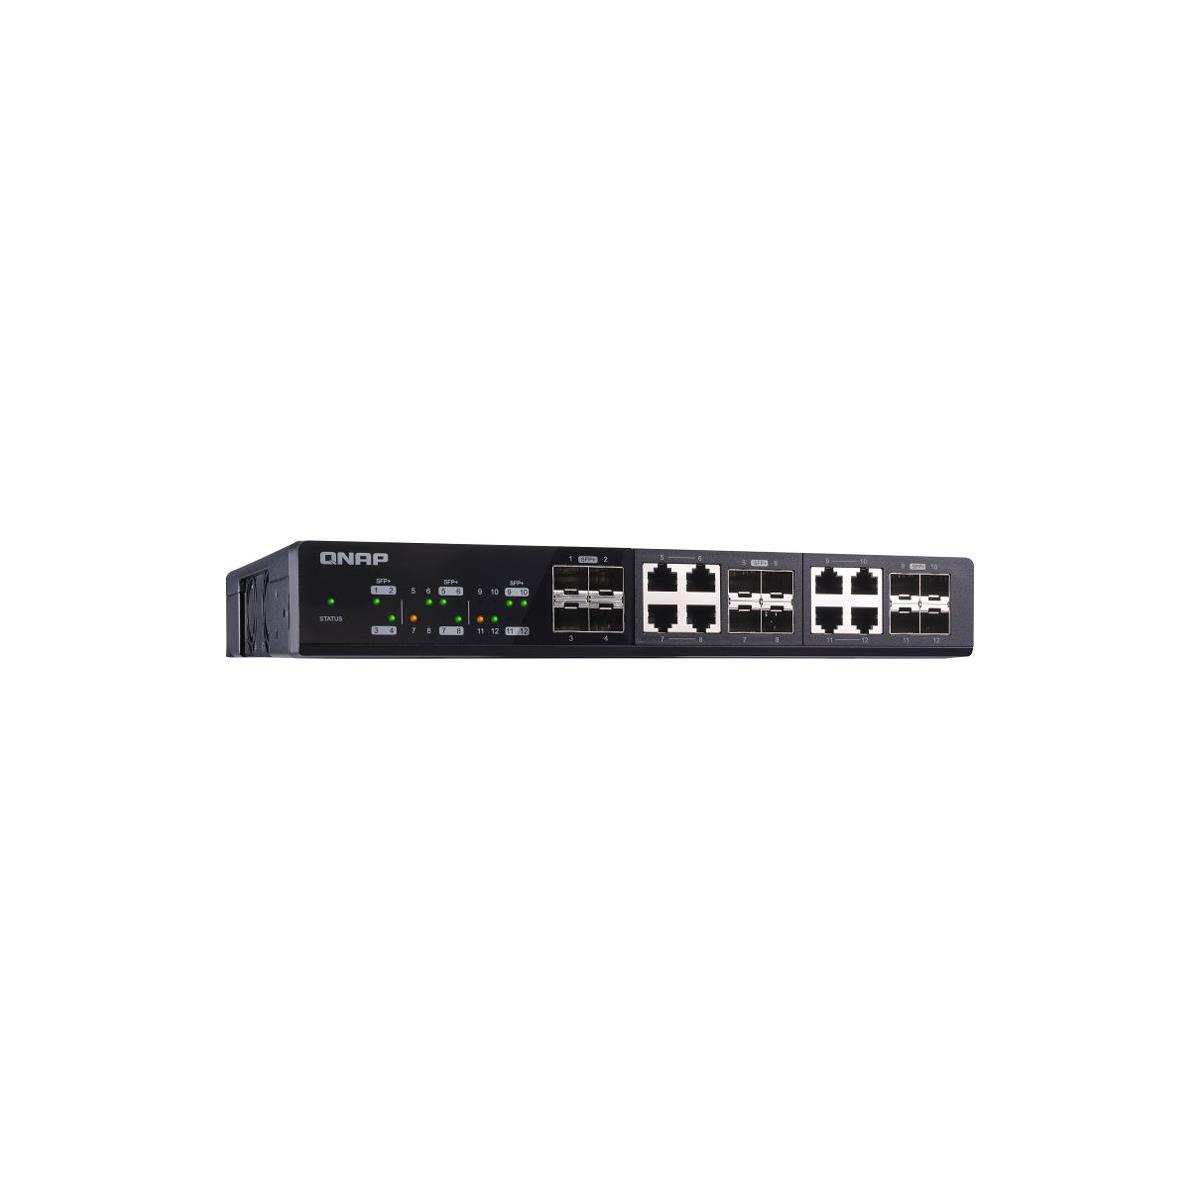 

QNAP Qnap QSW-1208-8C 12-Port Unmanaged 10GbE Switch